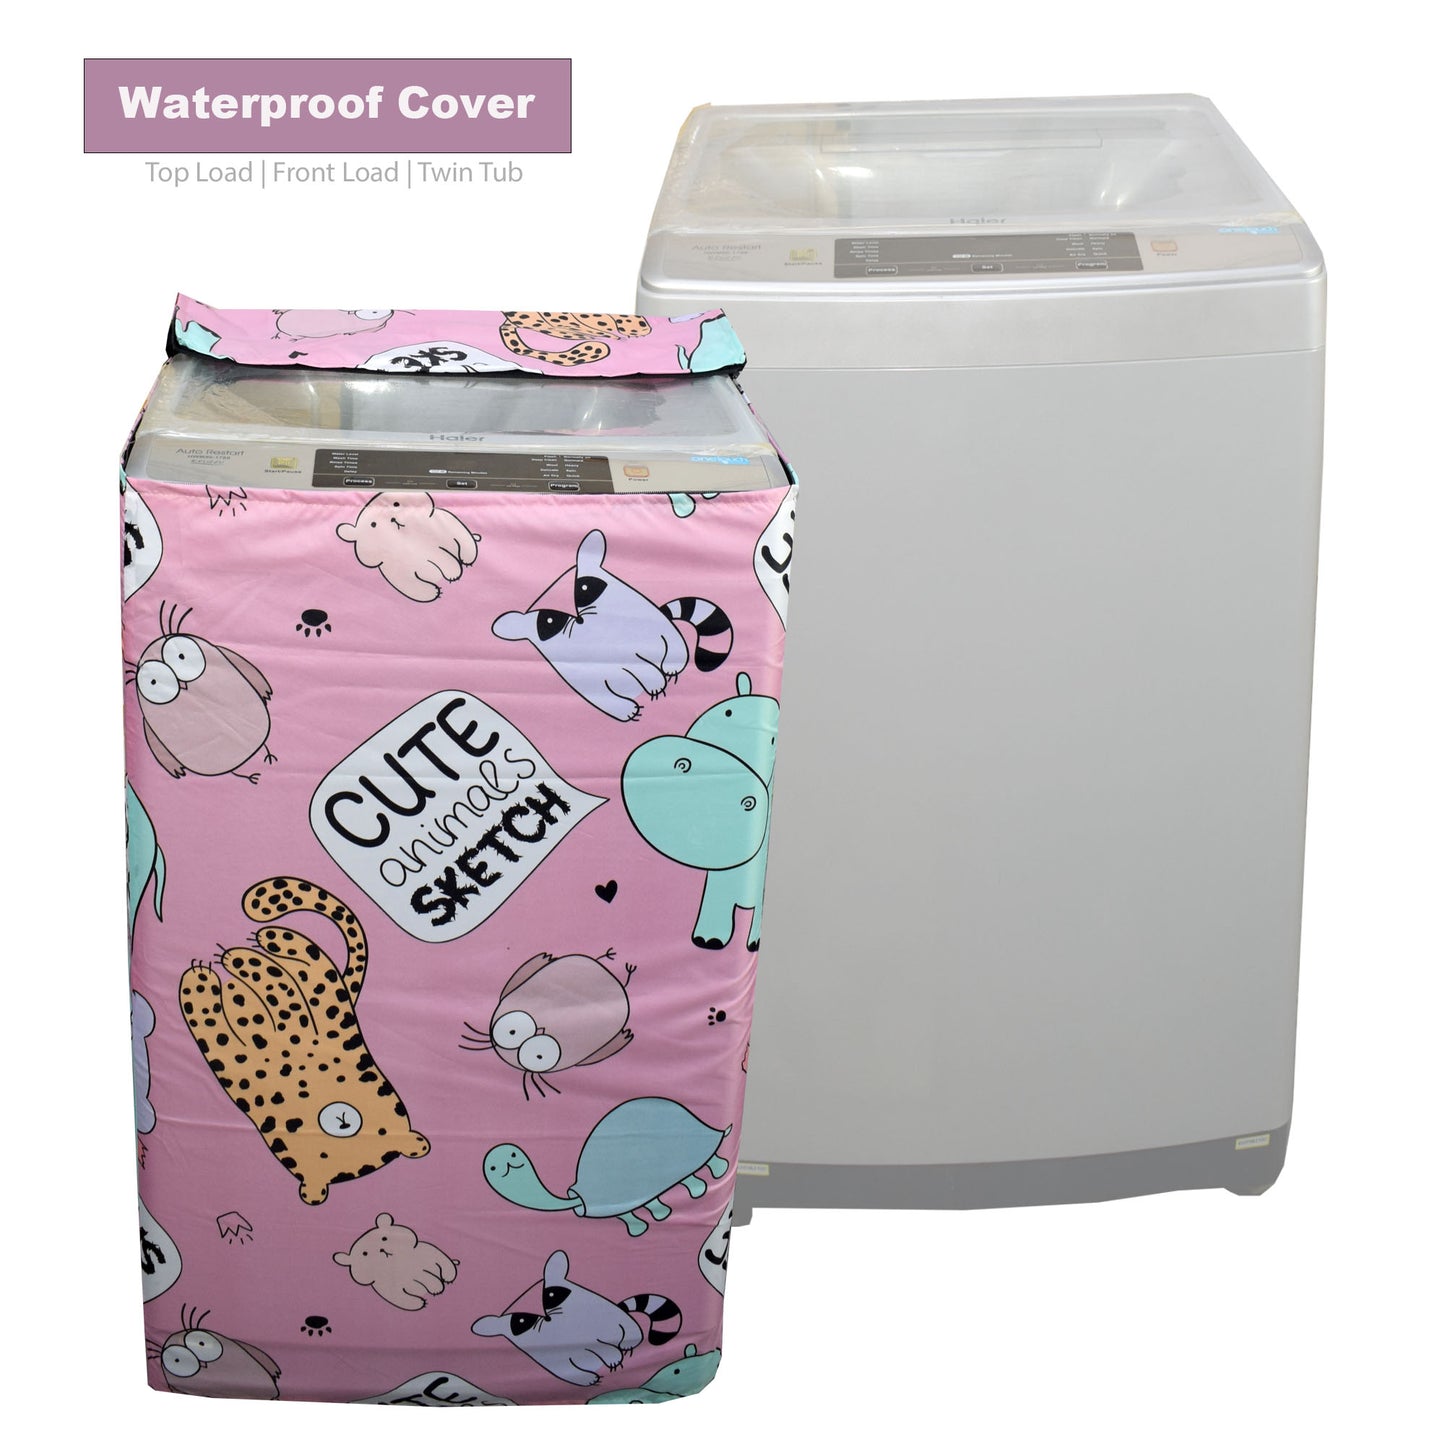 Best Waterproof Washing Machine Cover Pink for Top Load & Front Load in Pakistan